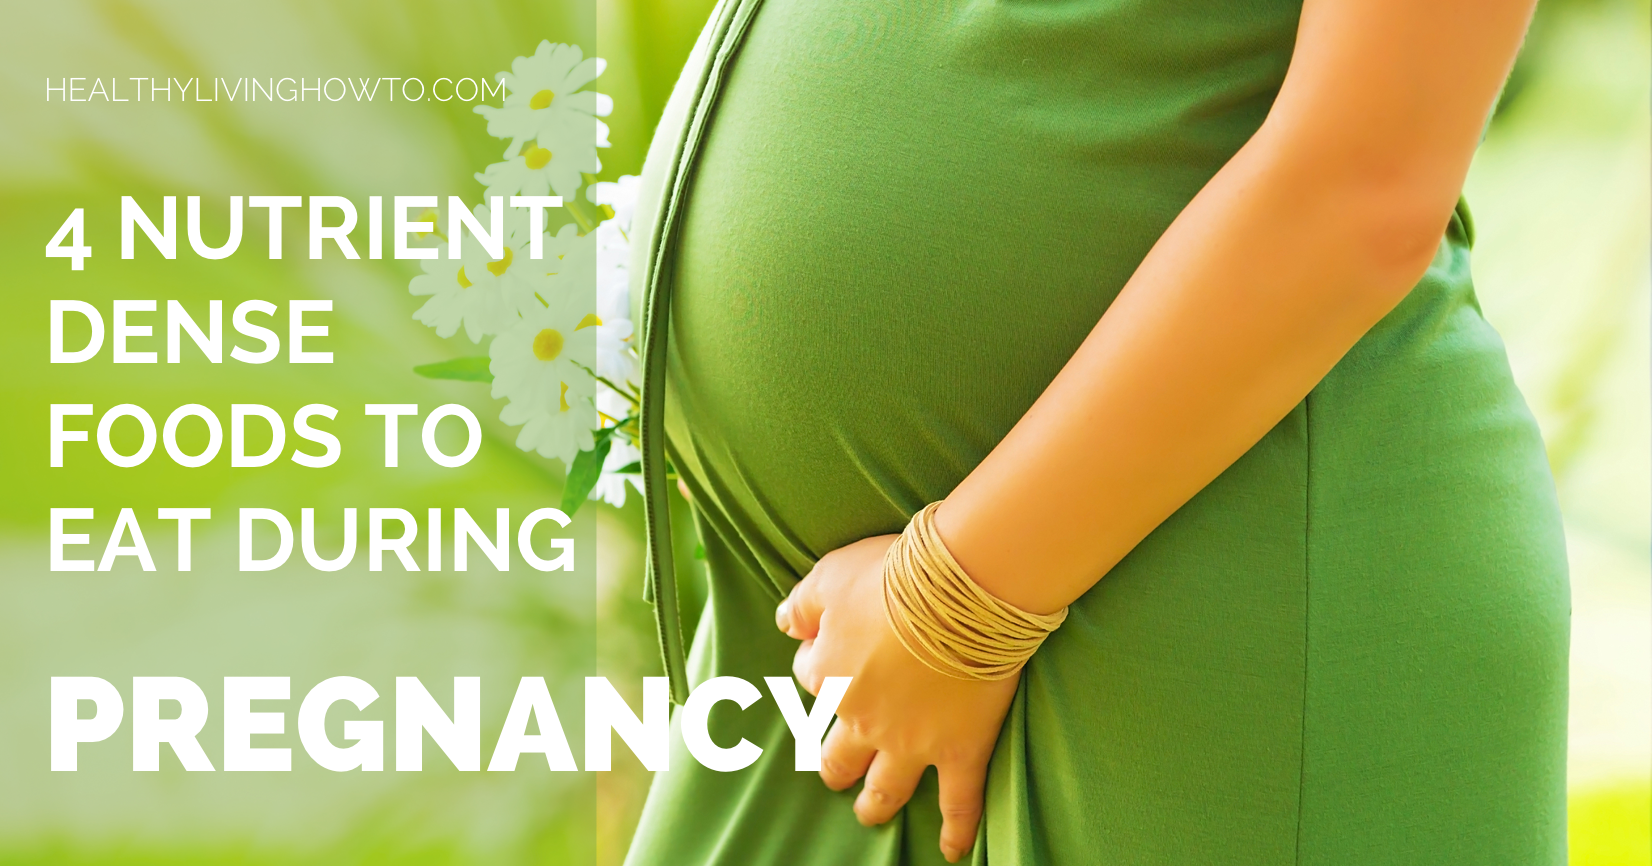 4 Nutrient Dense Foods To Eat During Pregnancy | healthylivinghowto.com